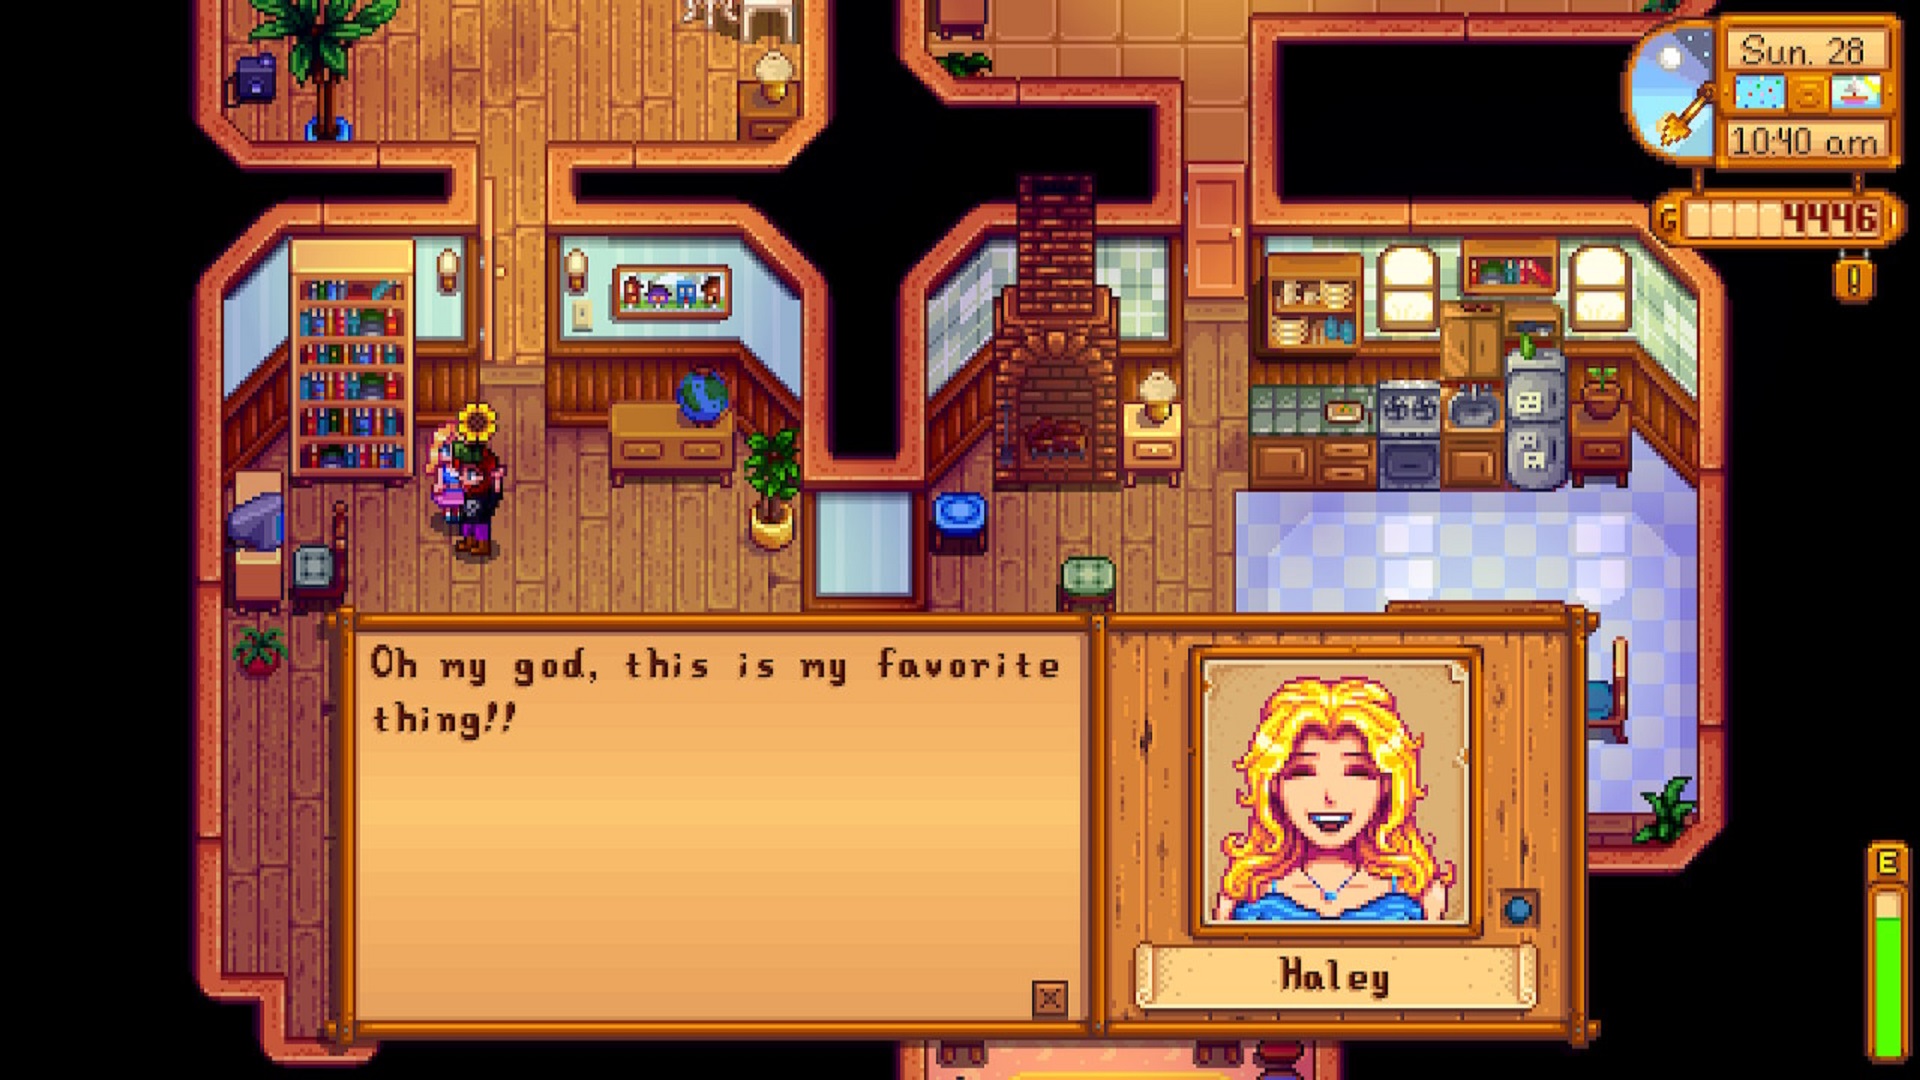 More Wedding Venues in Stardew Valley - Life After Grind